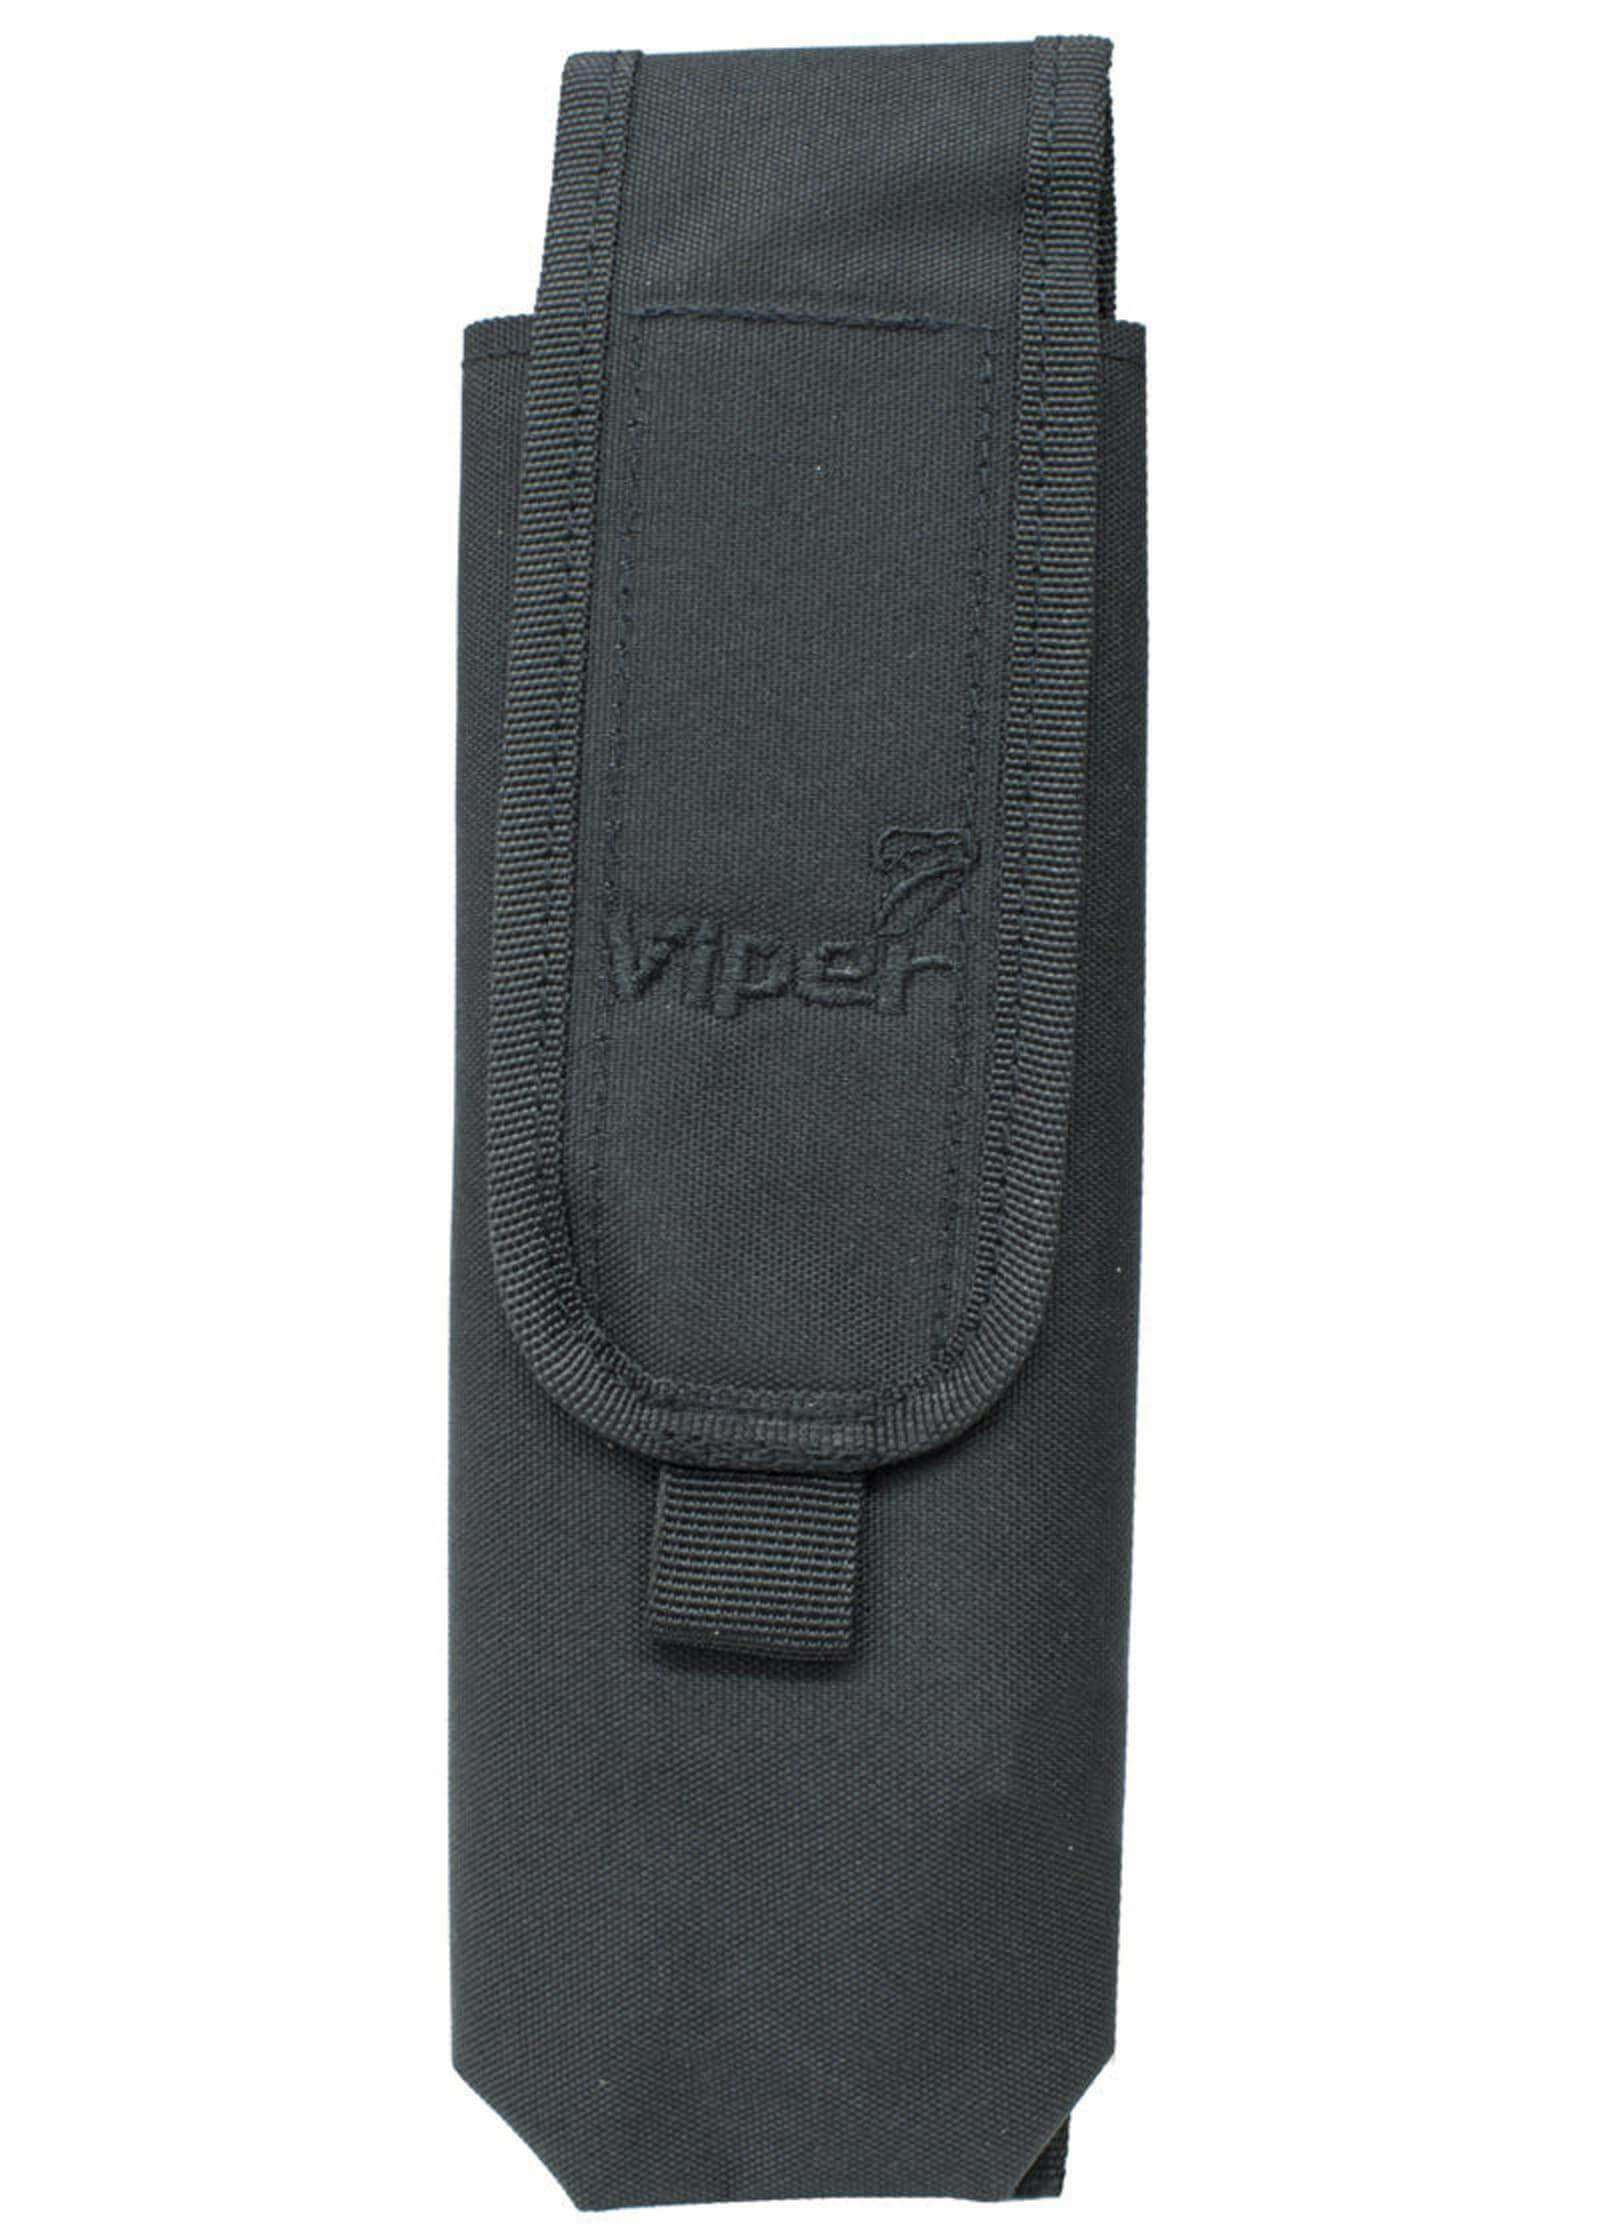 Viper P90 Mag Pouch Black P90 Ump Magazine Pouch Airsoft Military Style 